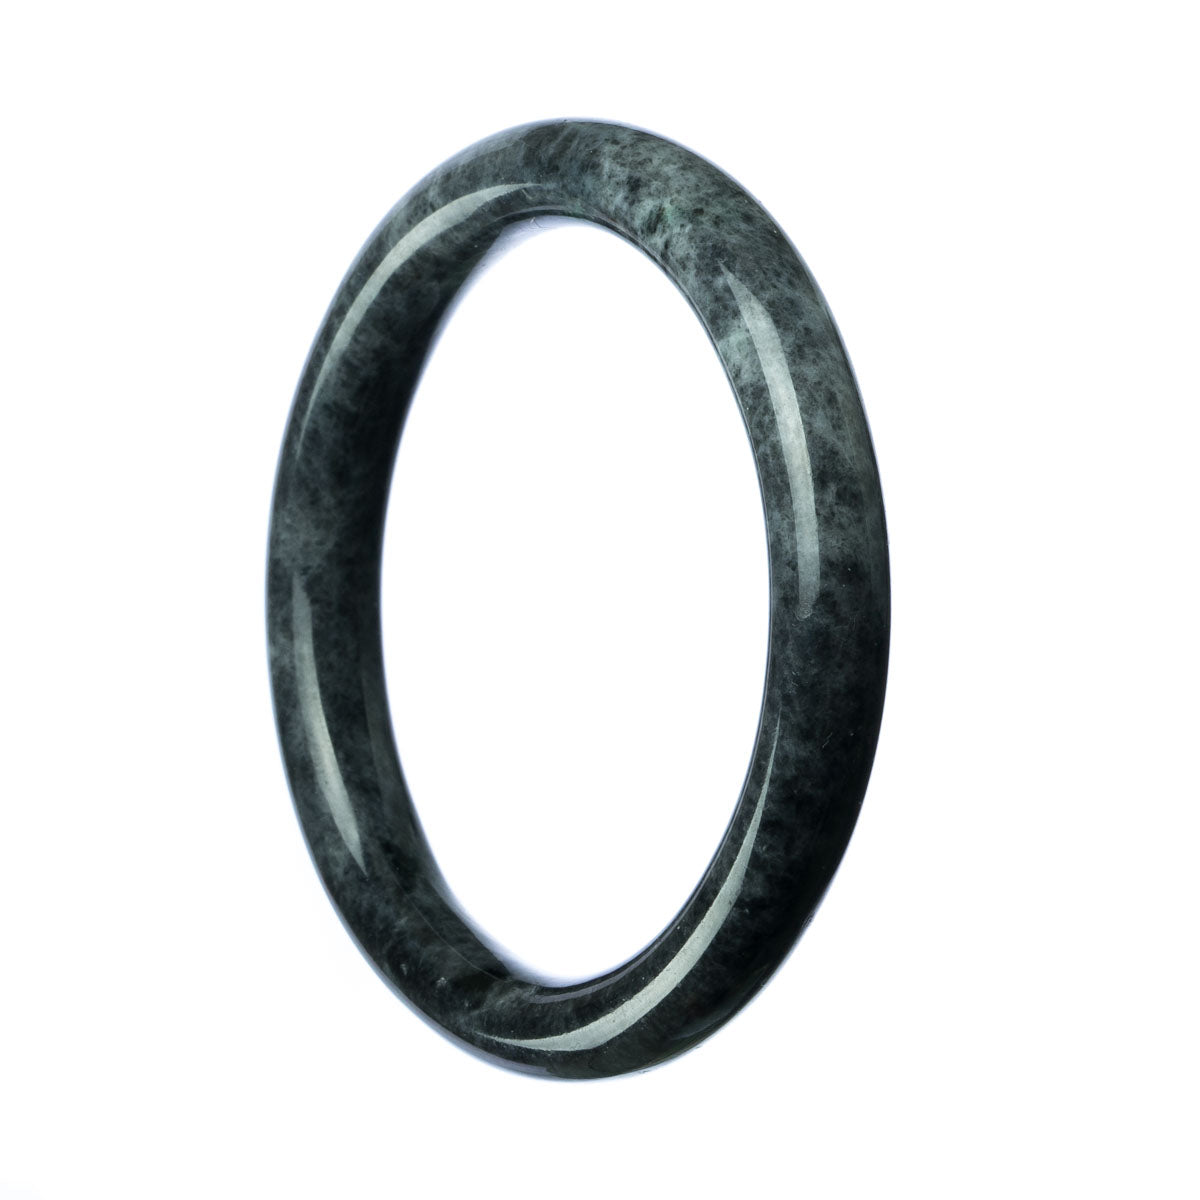 A round grey Burmese jade bangle bracelet with a diameter of 59mm, featuring genuine Type A jade.